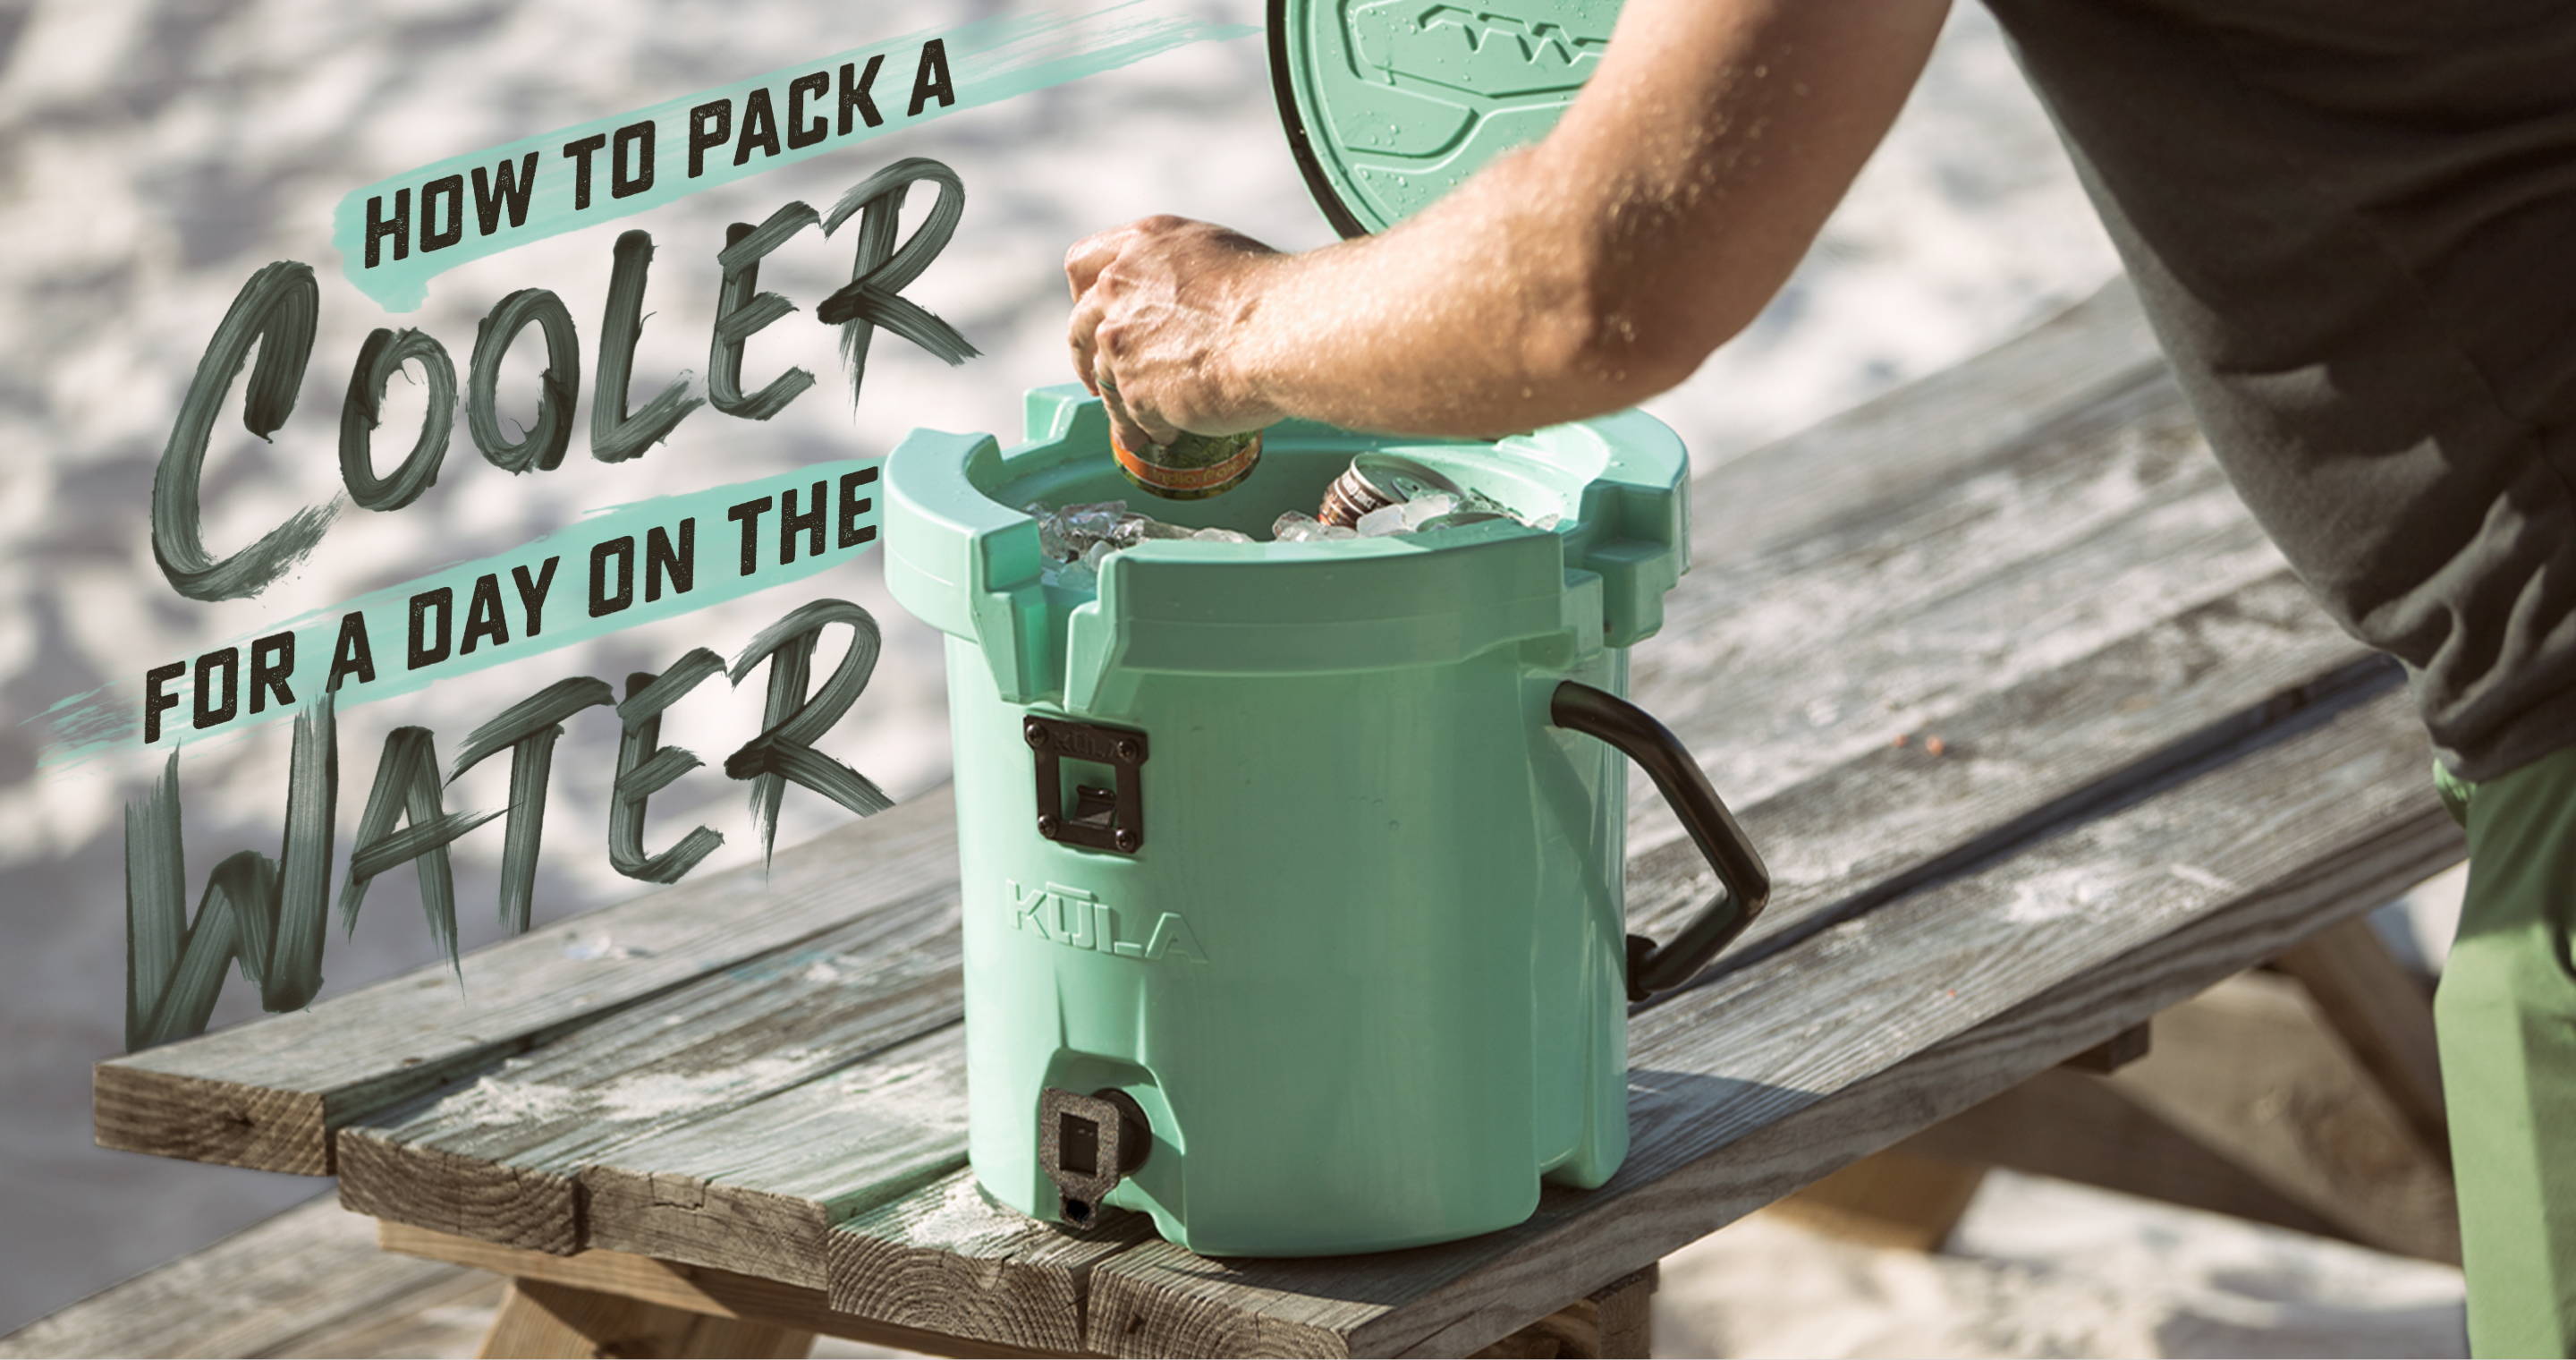 How to Pack a Cooler for a Day on the Water